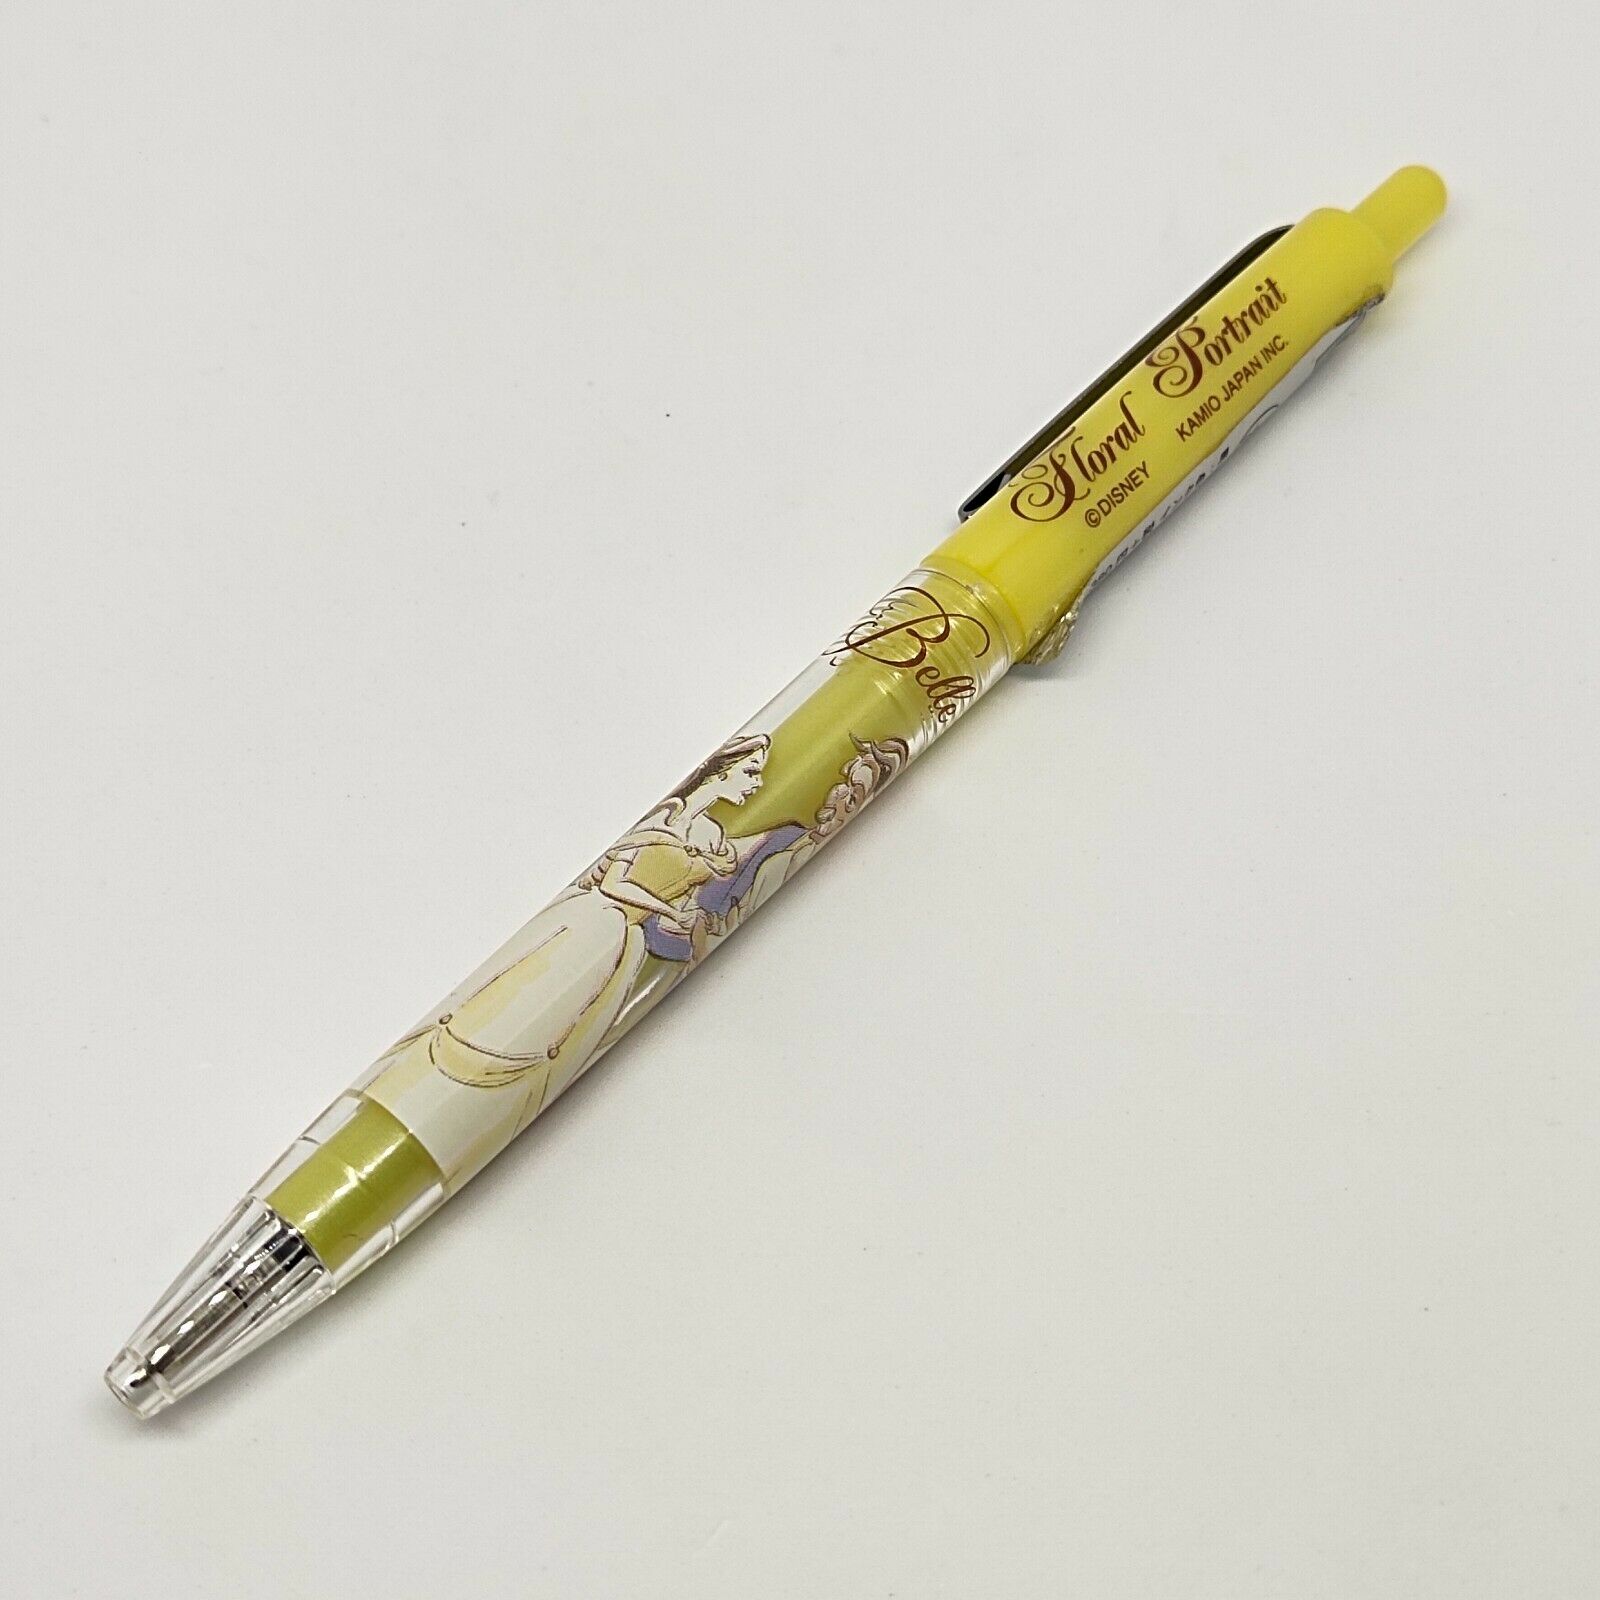 Japan Disney Style Belle Beauty And The Beast Pen Ballpoint Stationery Black Ink